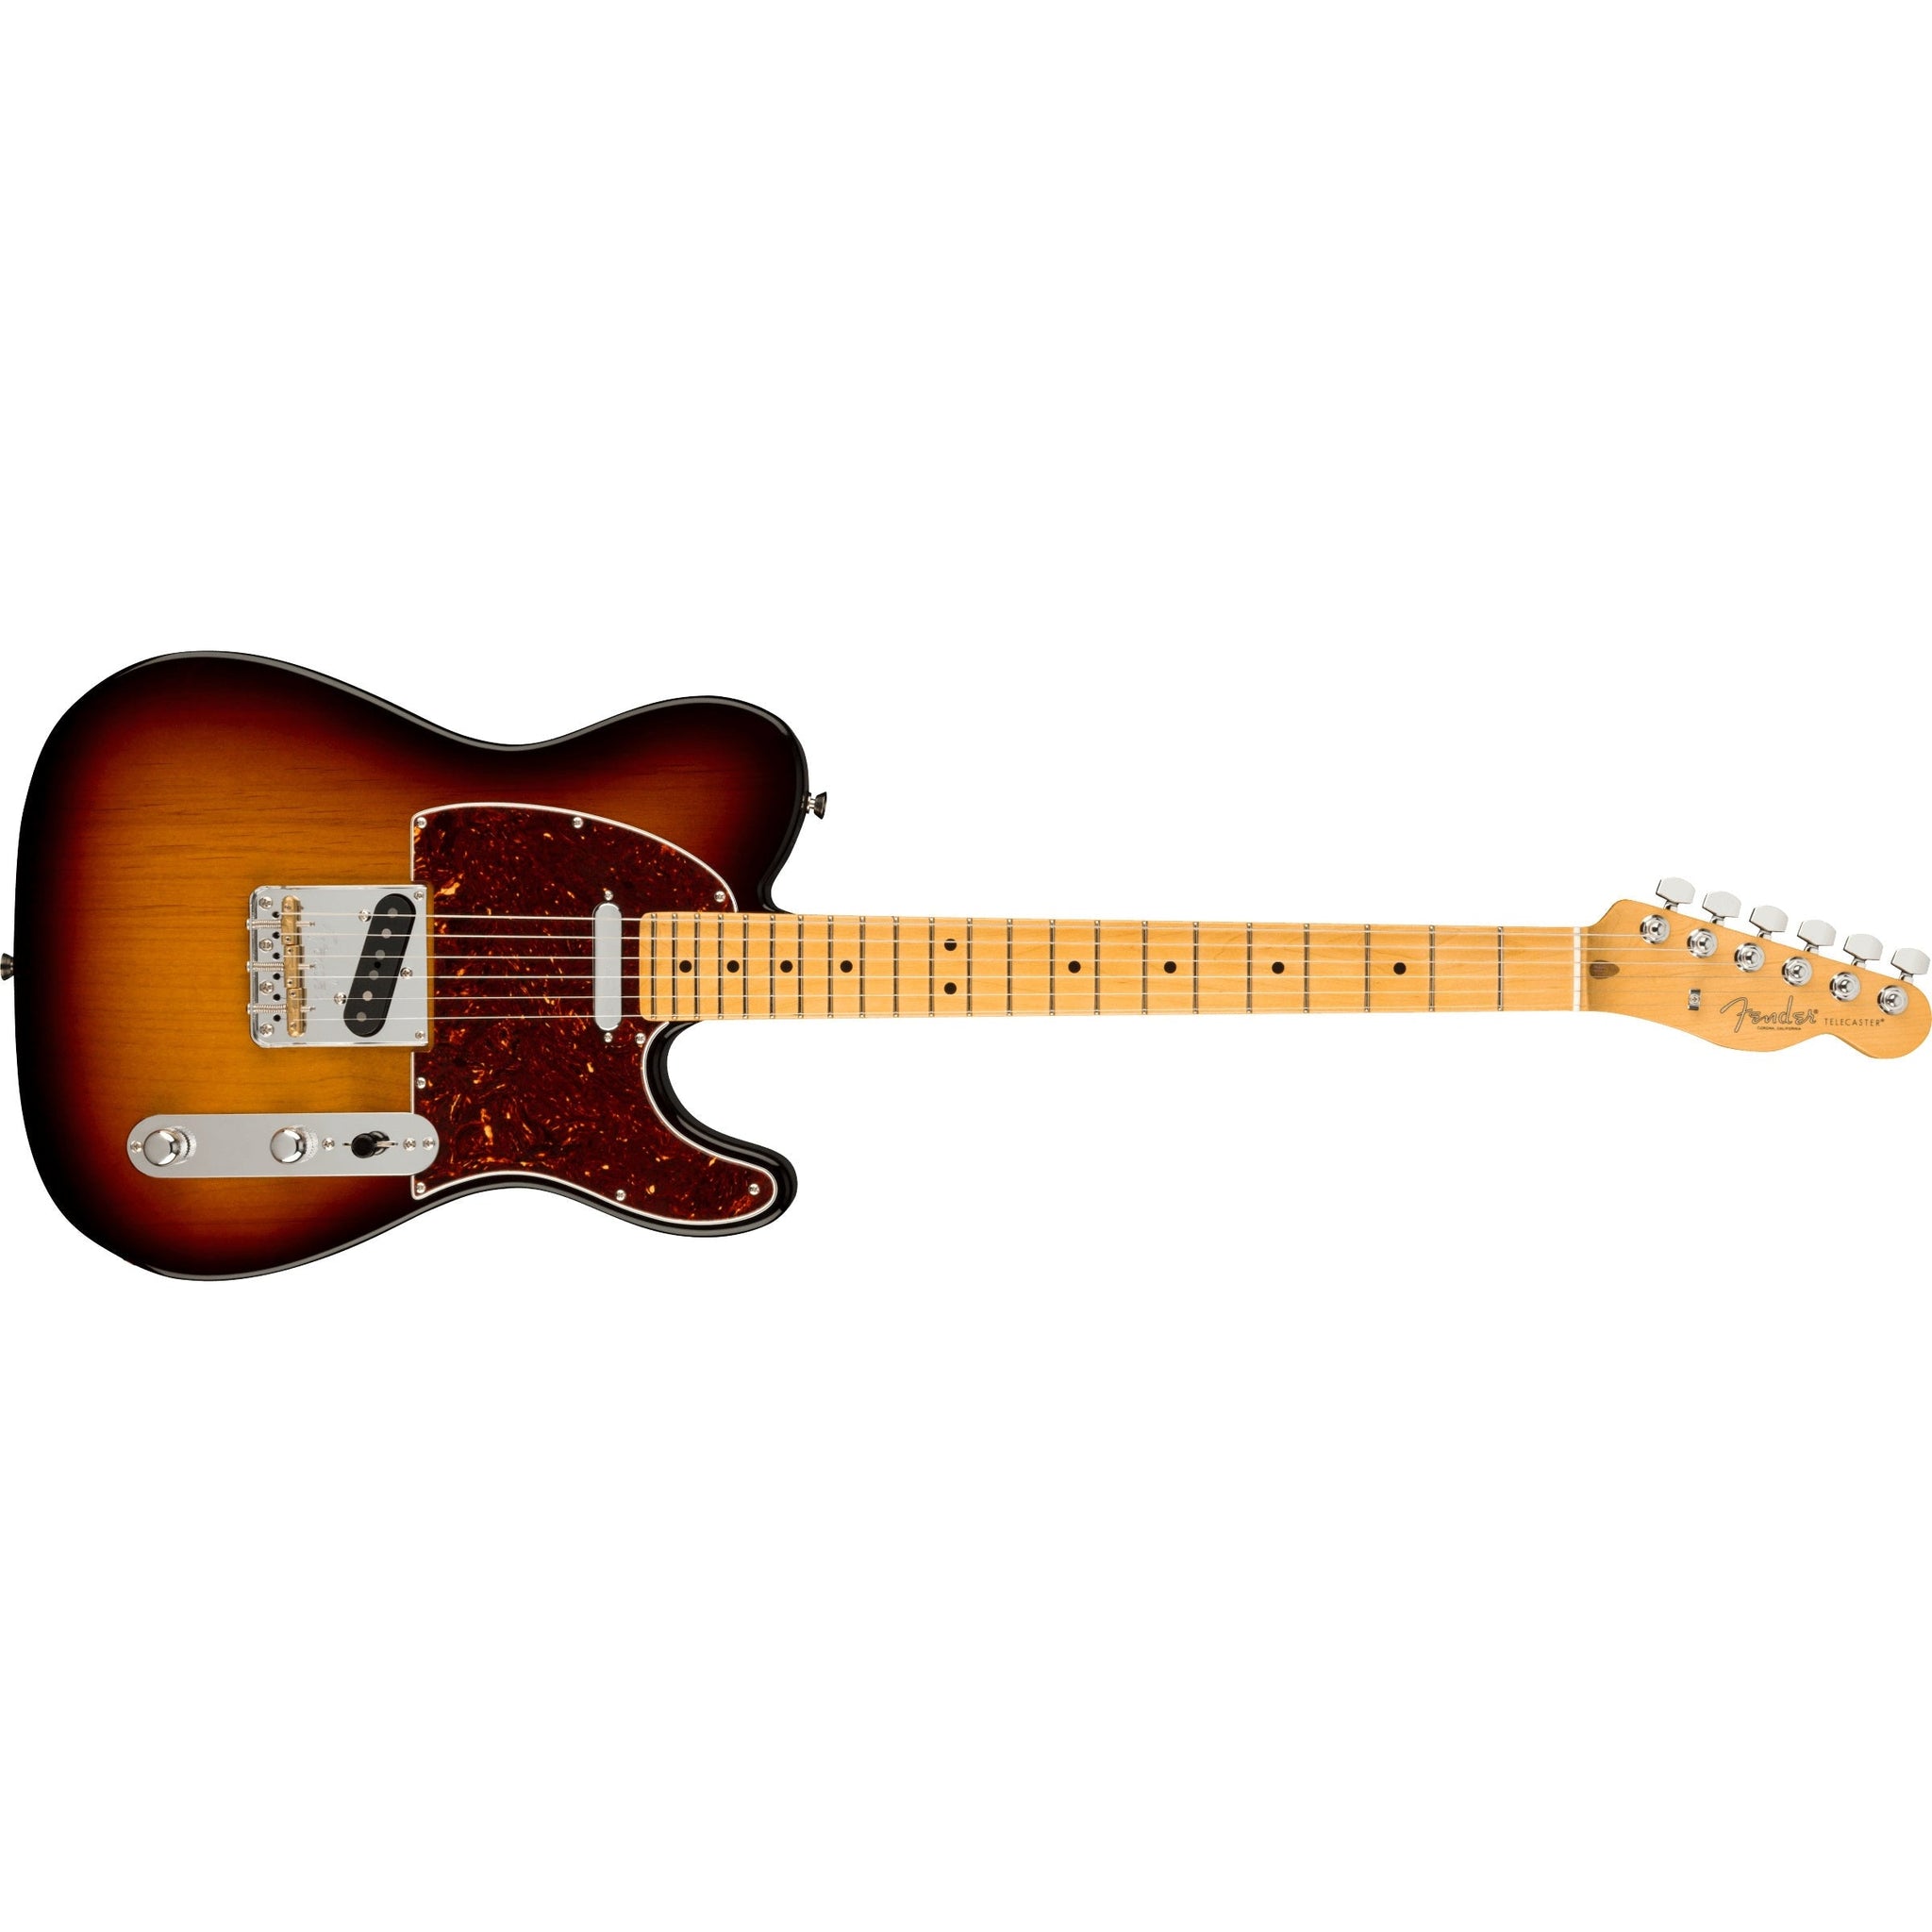 Fender American Professional II Telecaster Electric Guitar MN with Hardshell Case-3-Colour Sunburst-Music World Academy